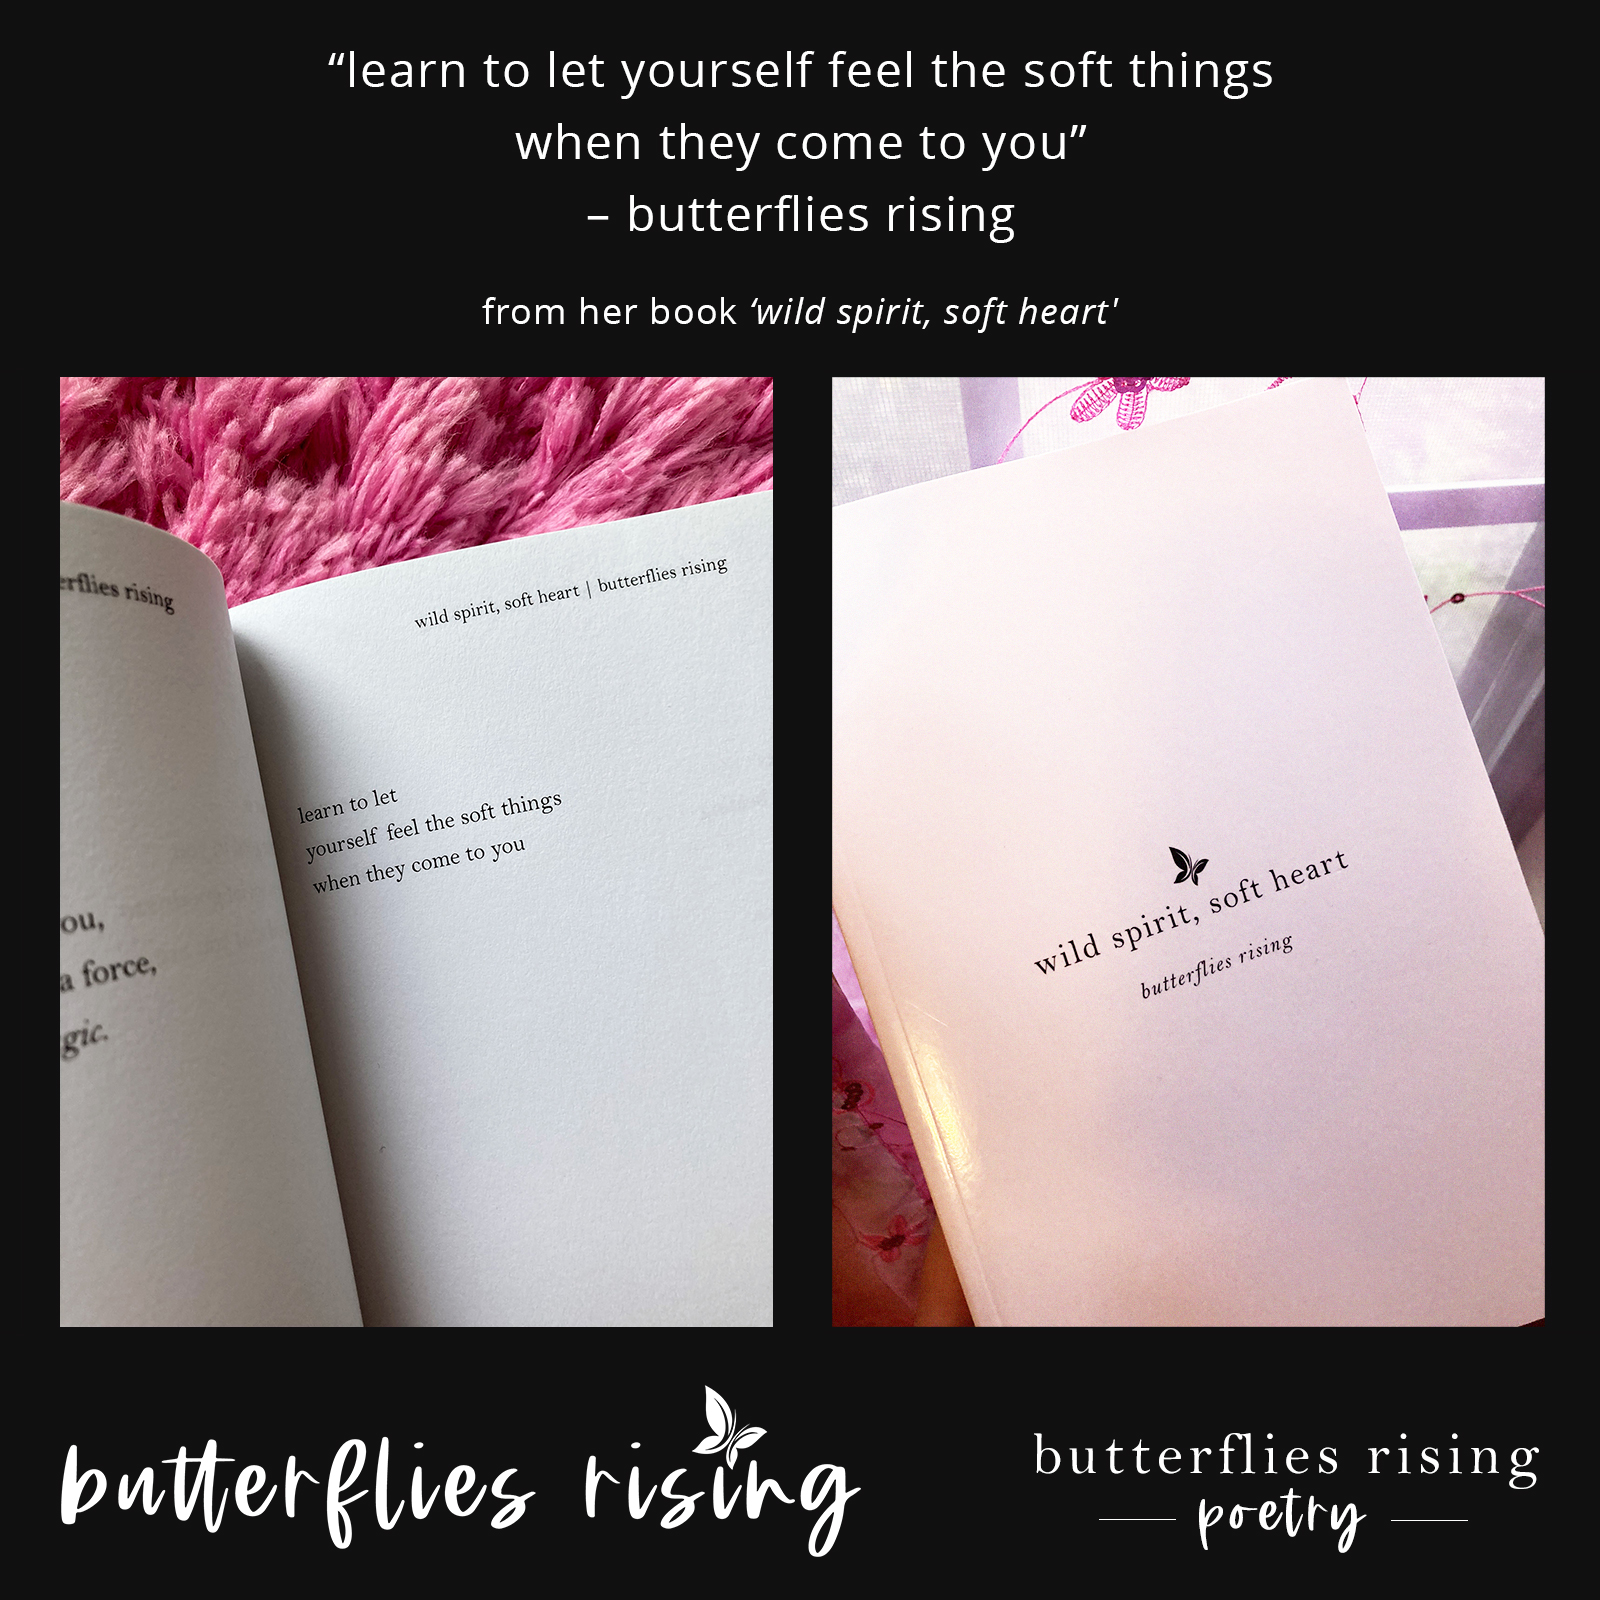 learn to let yourself feel the soft things when they come to you - butterflies rising